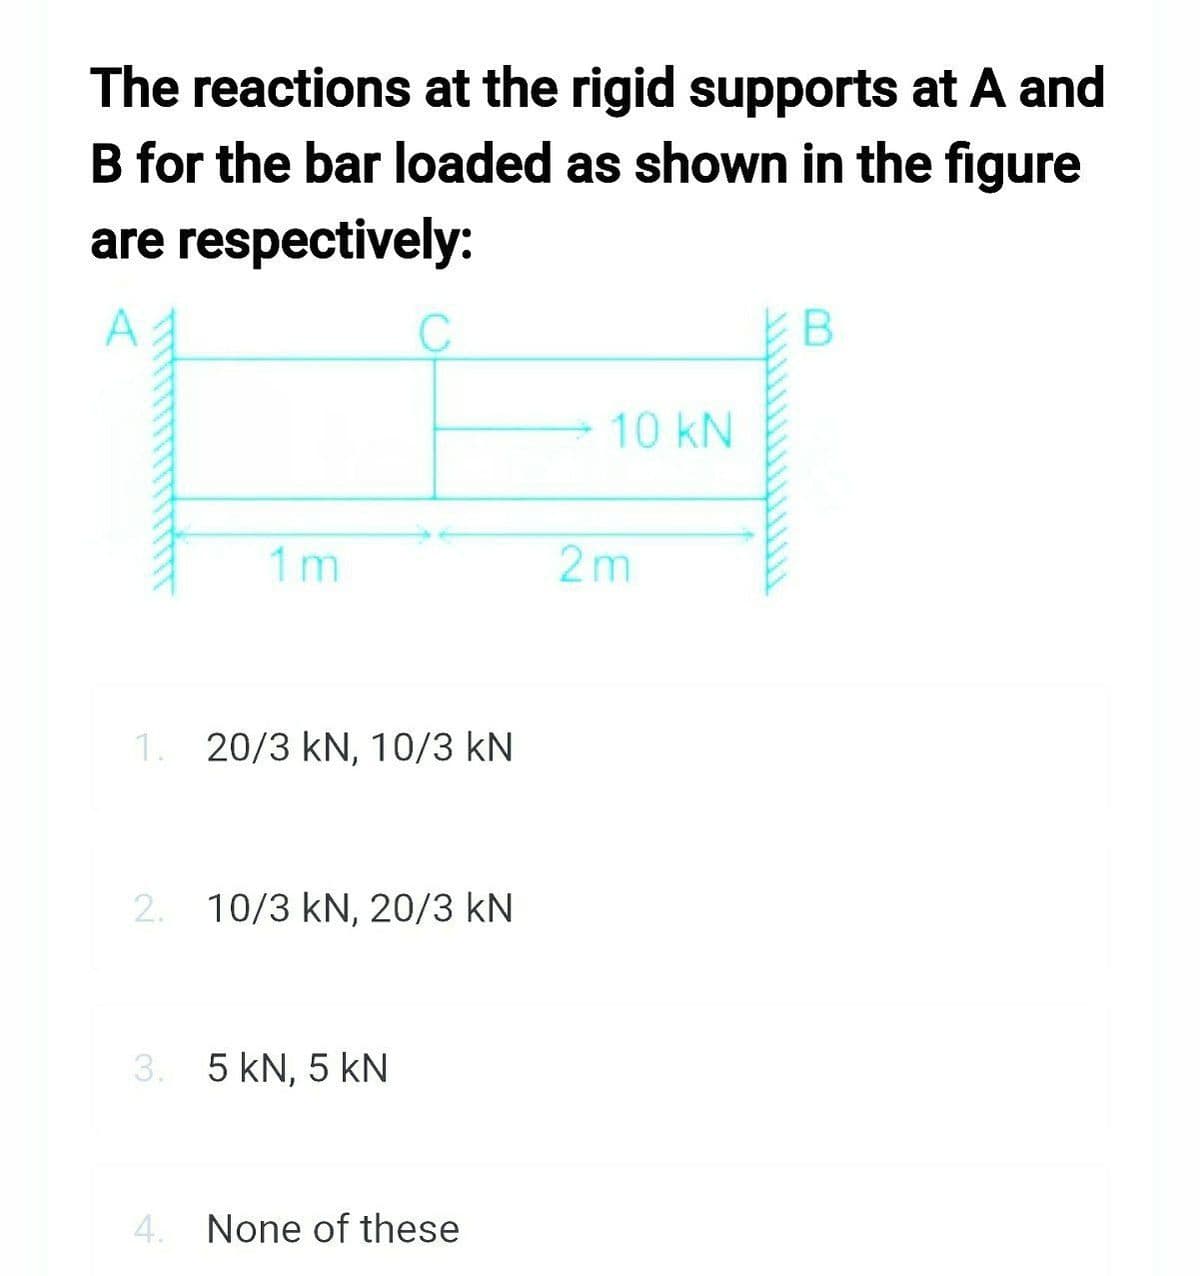 The reactions at the rigid supports at A and
B for the bar loaded as shown in the figure
are respectively:
1m
C
1. 20/3 kN, 10/3 KN
2. 10/3 kN, 20/3 KN
3. 5 kN, 5 kN
4. None of these
10 kN
2m
B